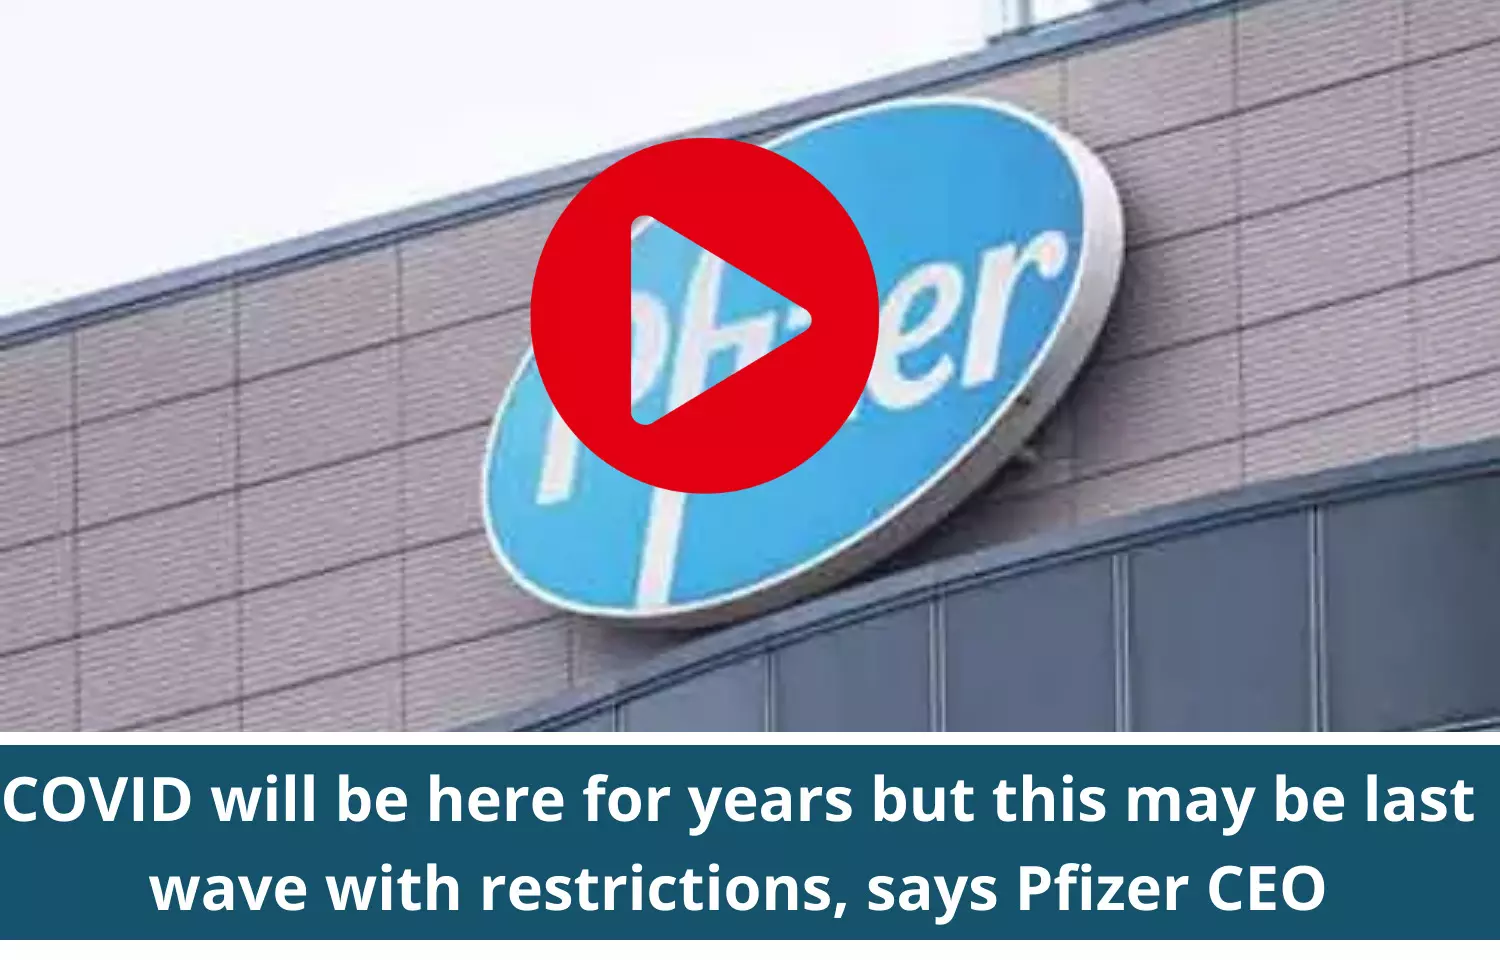 COVID will be here for years but this may be last wave with restrictions, says Pfizer CEO